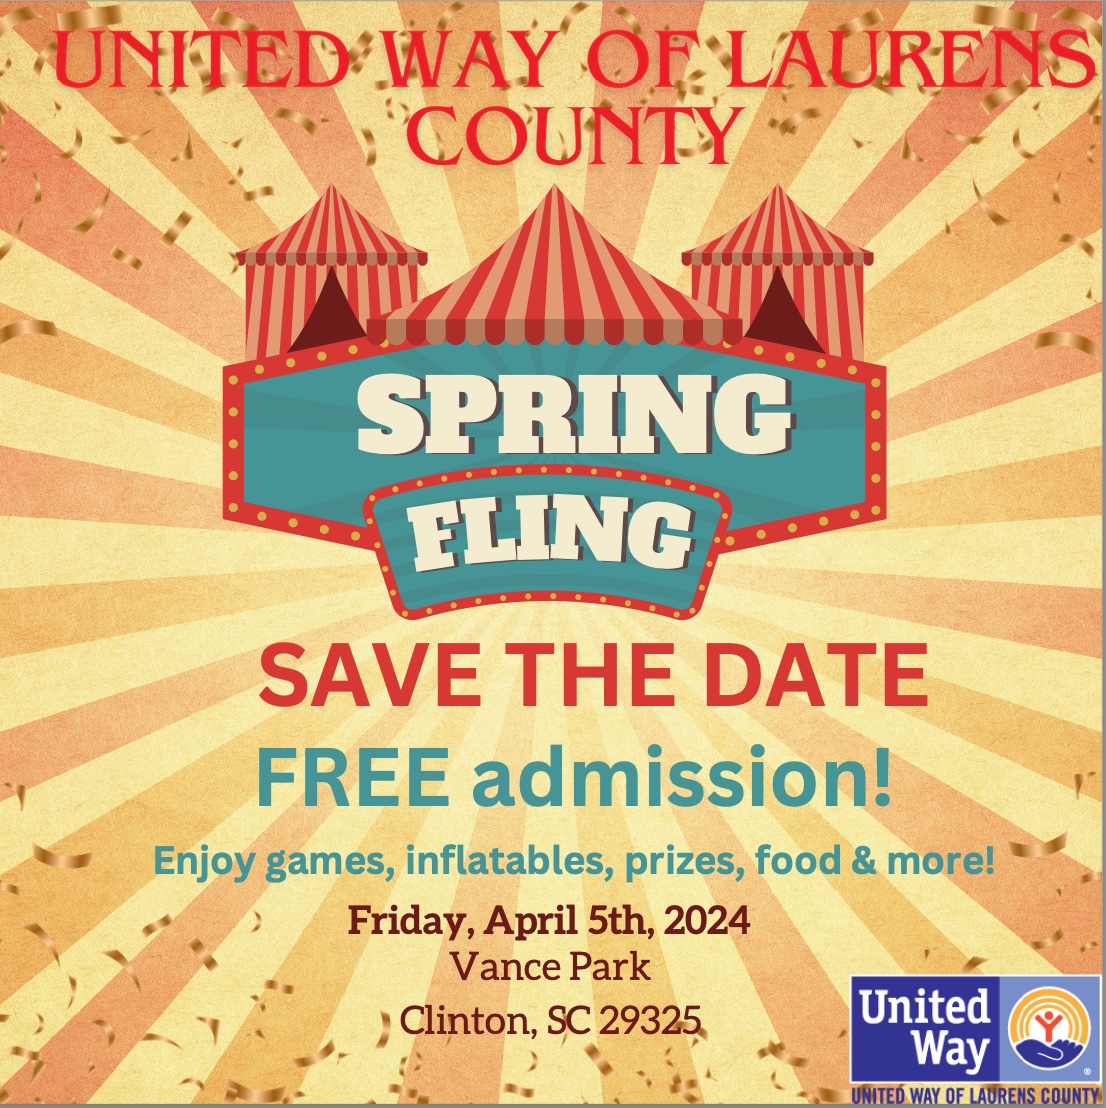 Spring fling save the date